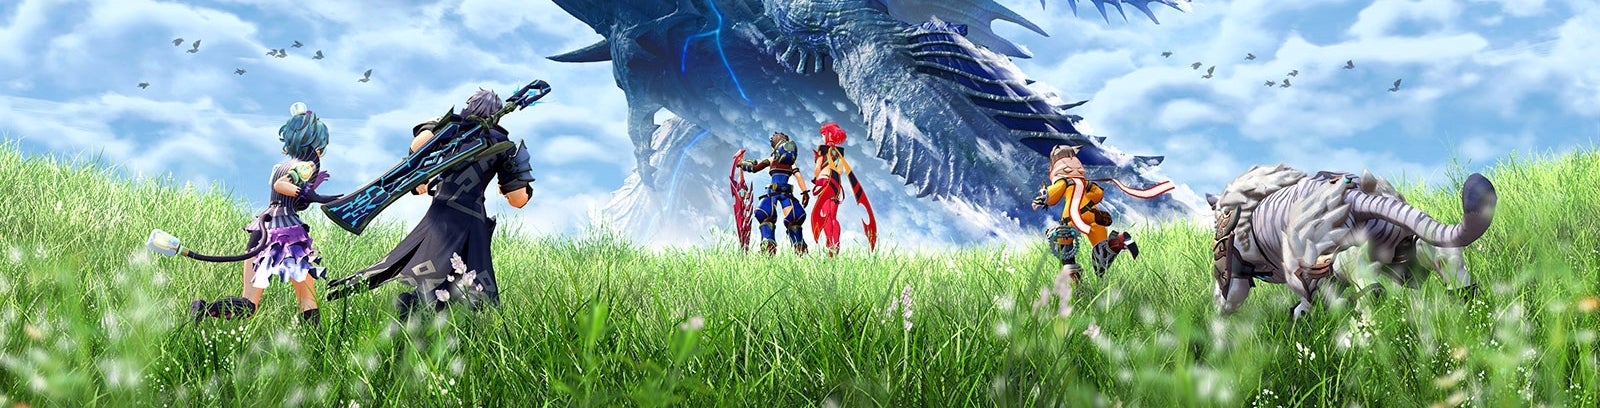 Image for Xenoblade Chronicles 2 review